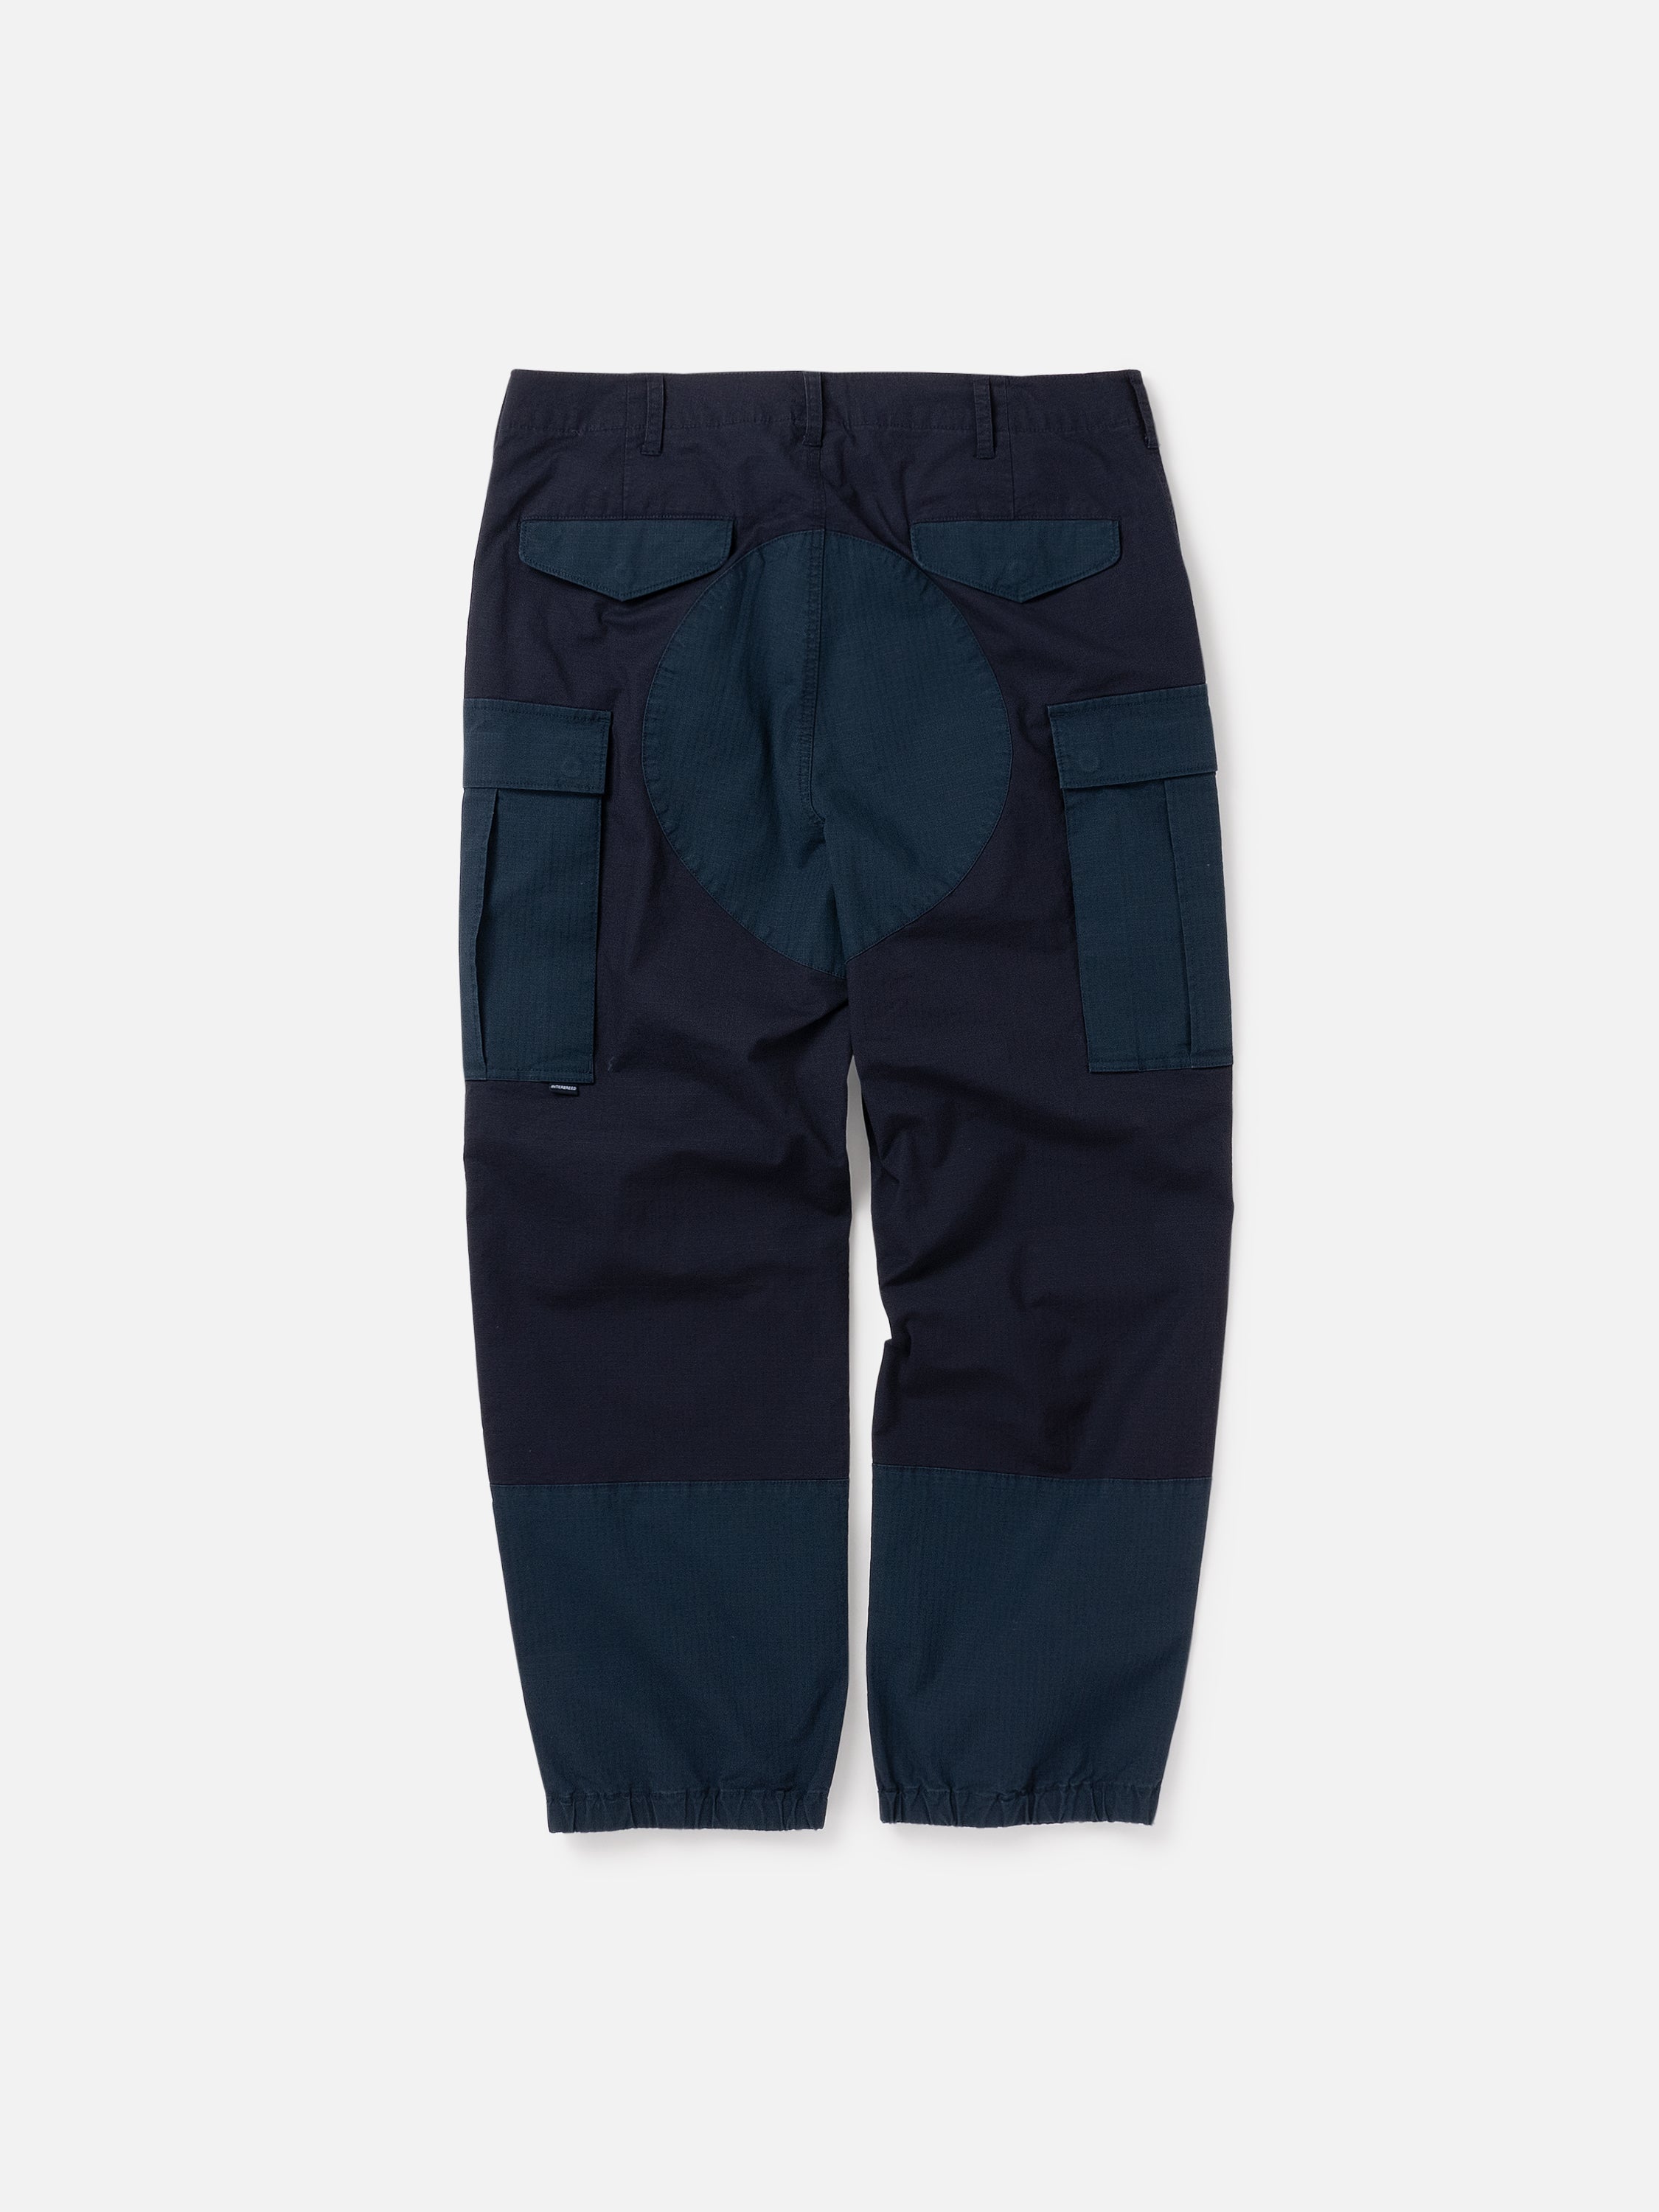 Switched Combat Pants (Navy)